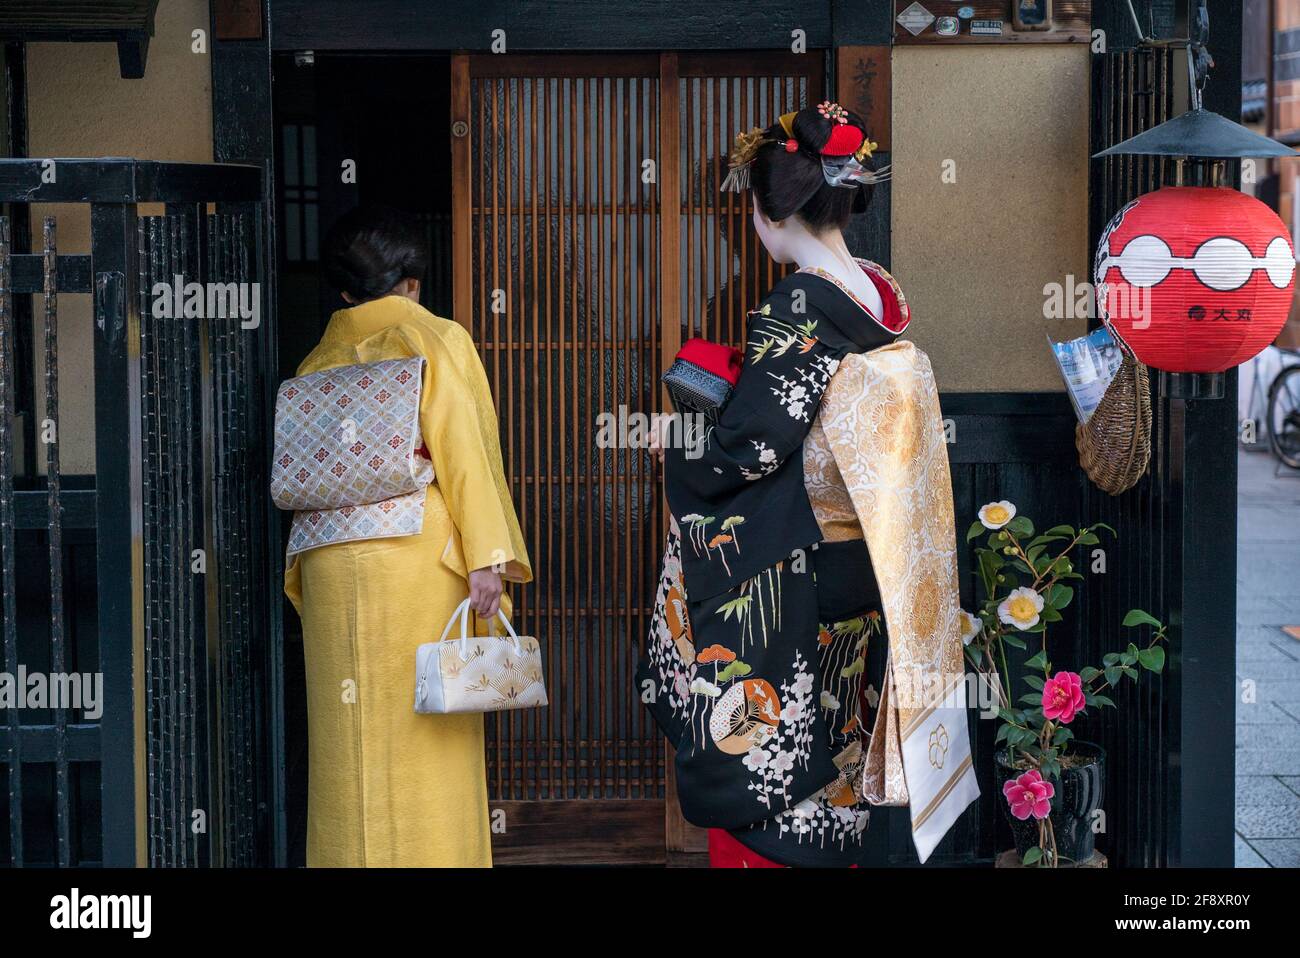 Japanese Geisha Maiko. Performer and chaperone calling at door of a client. Wearing traditional kimono dress and white make-up. Gion, Kyoto, Japan Stock Photo